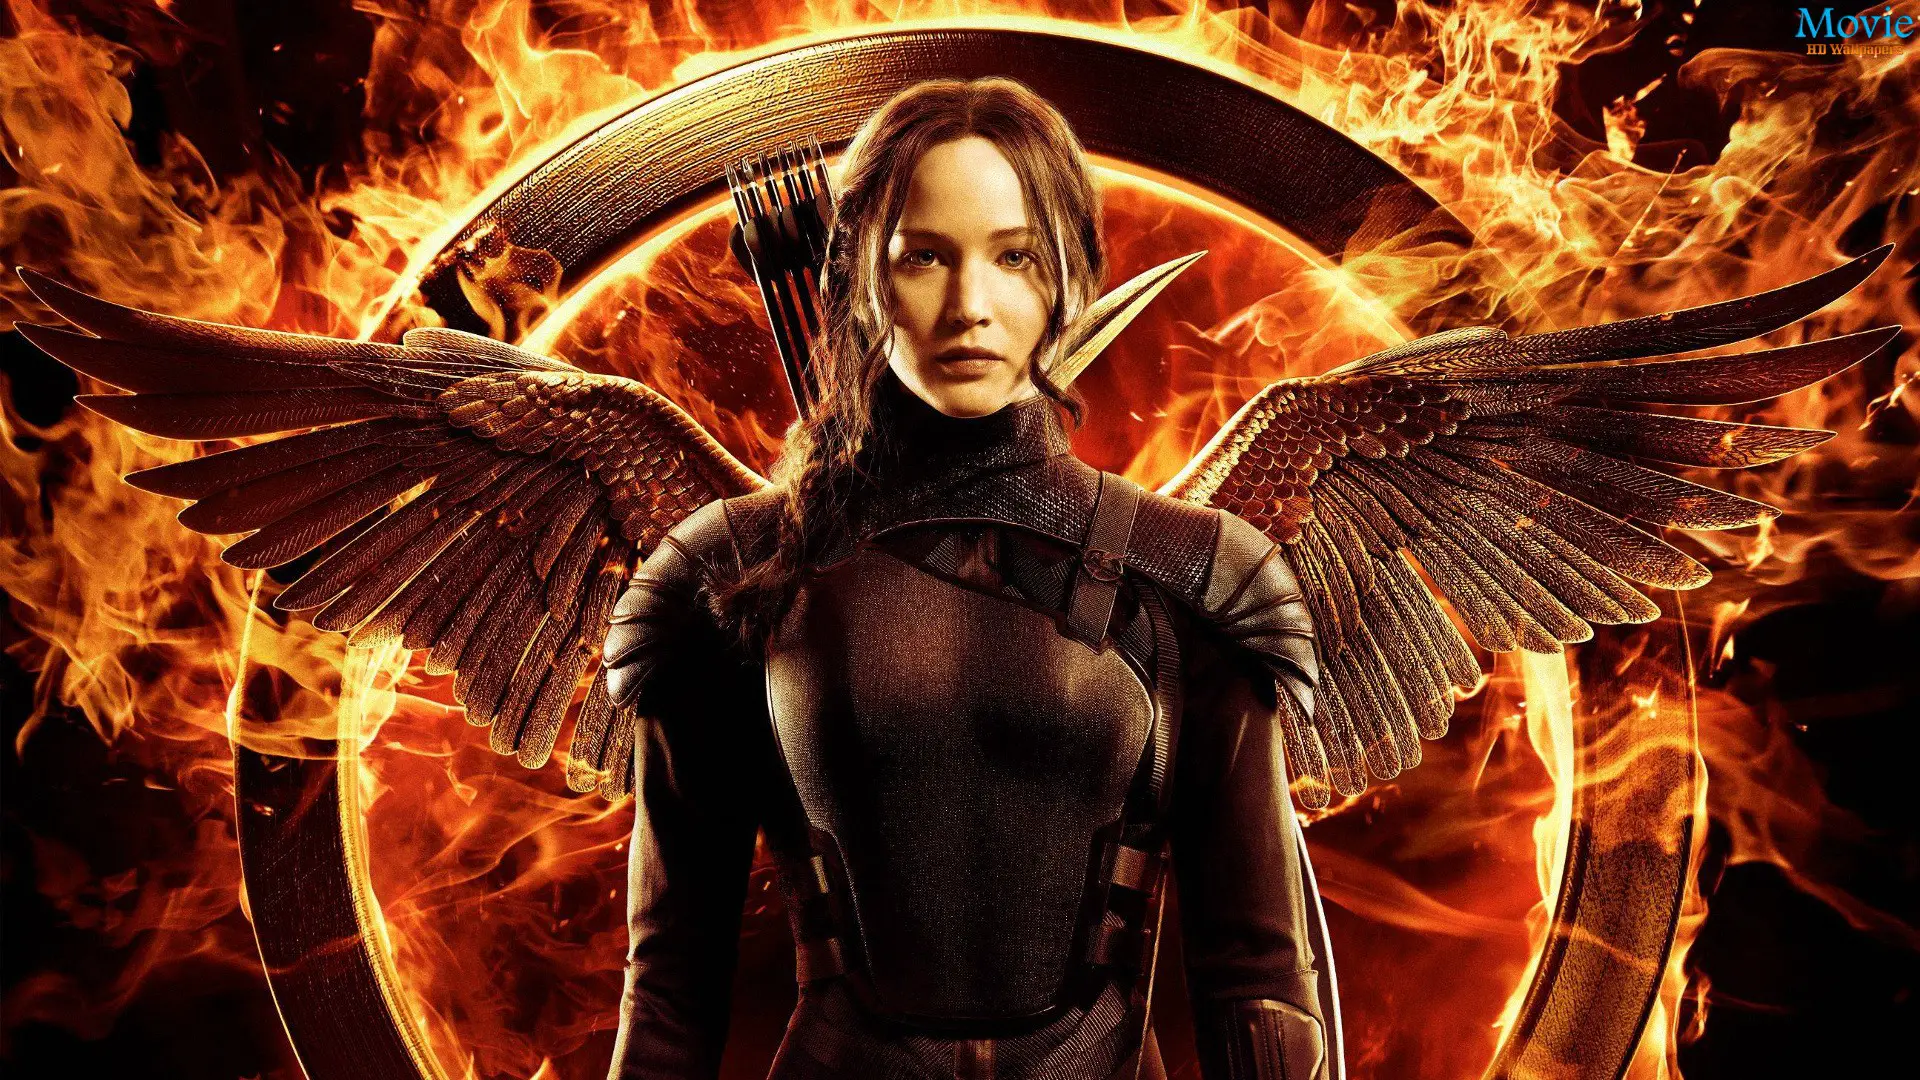 The Hunger Games Mockingjay Part 1 Movie Hd Wallpapers 